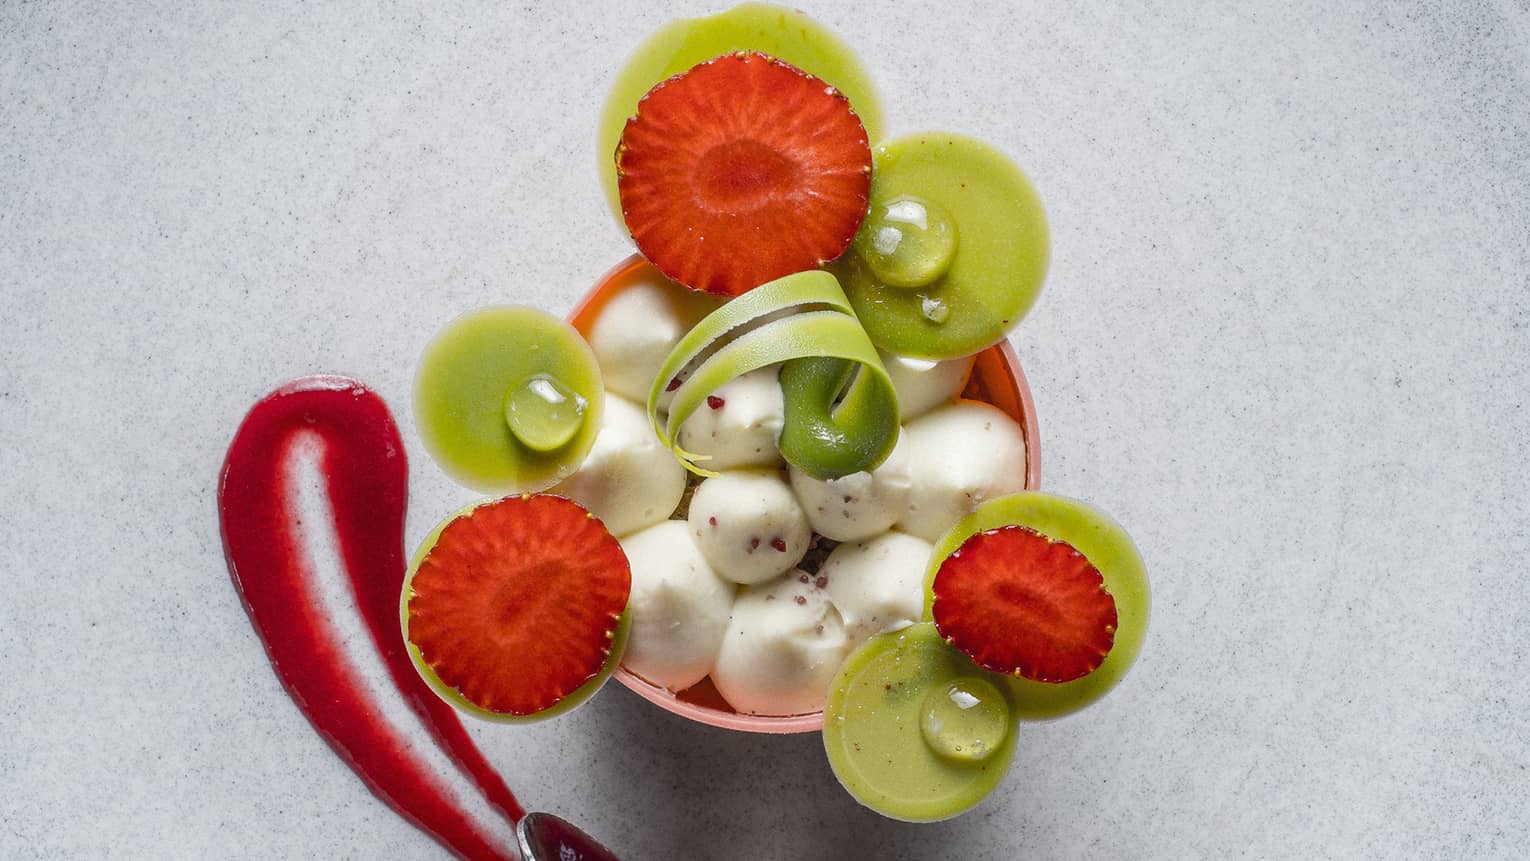 Artisanal dessert, small ice cream scoops garnished with artistic fruit slices, sauce